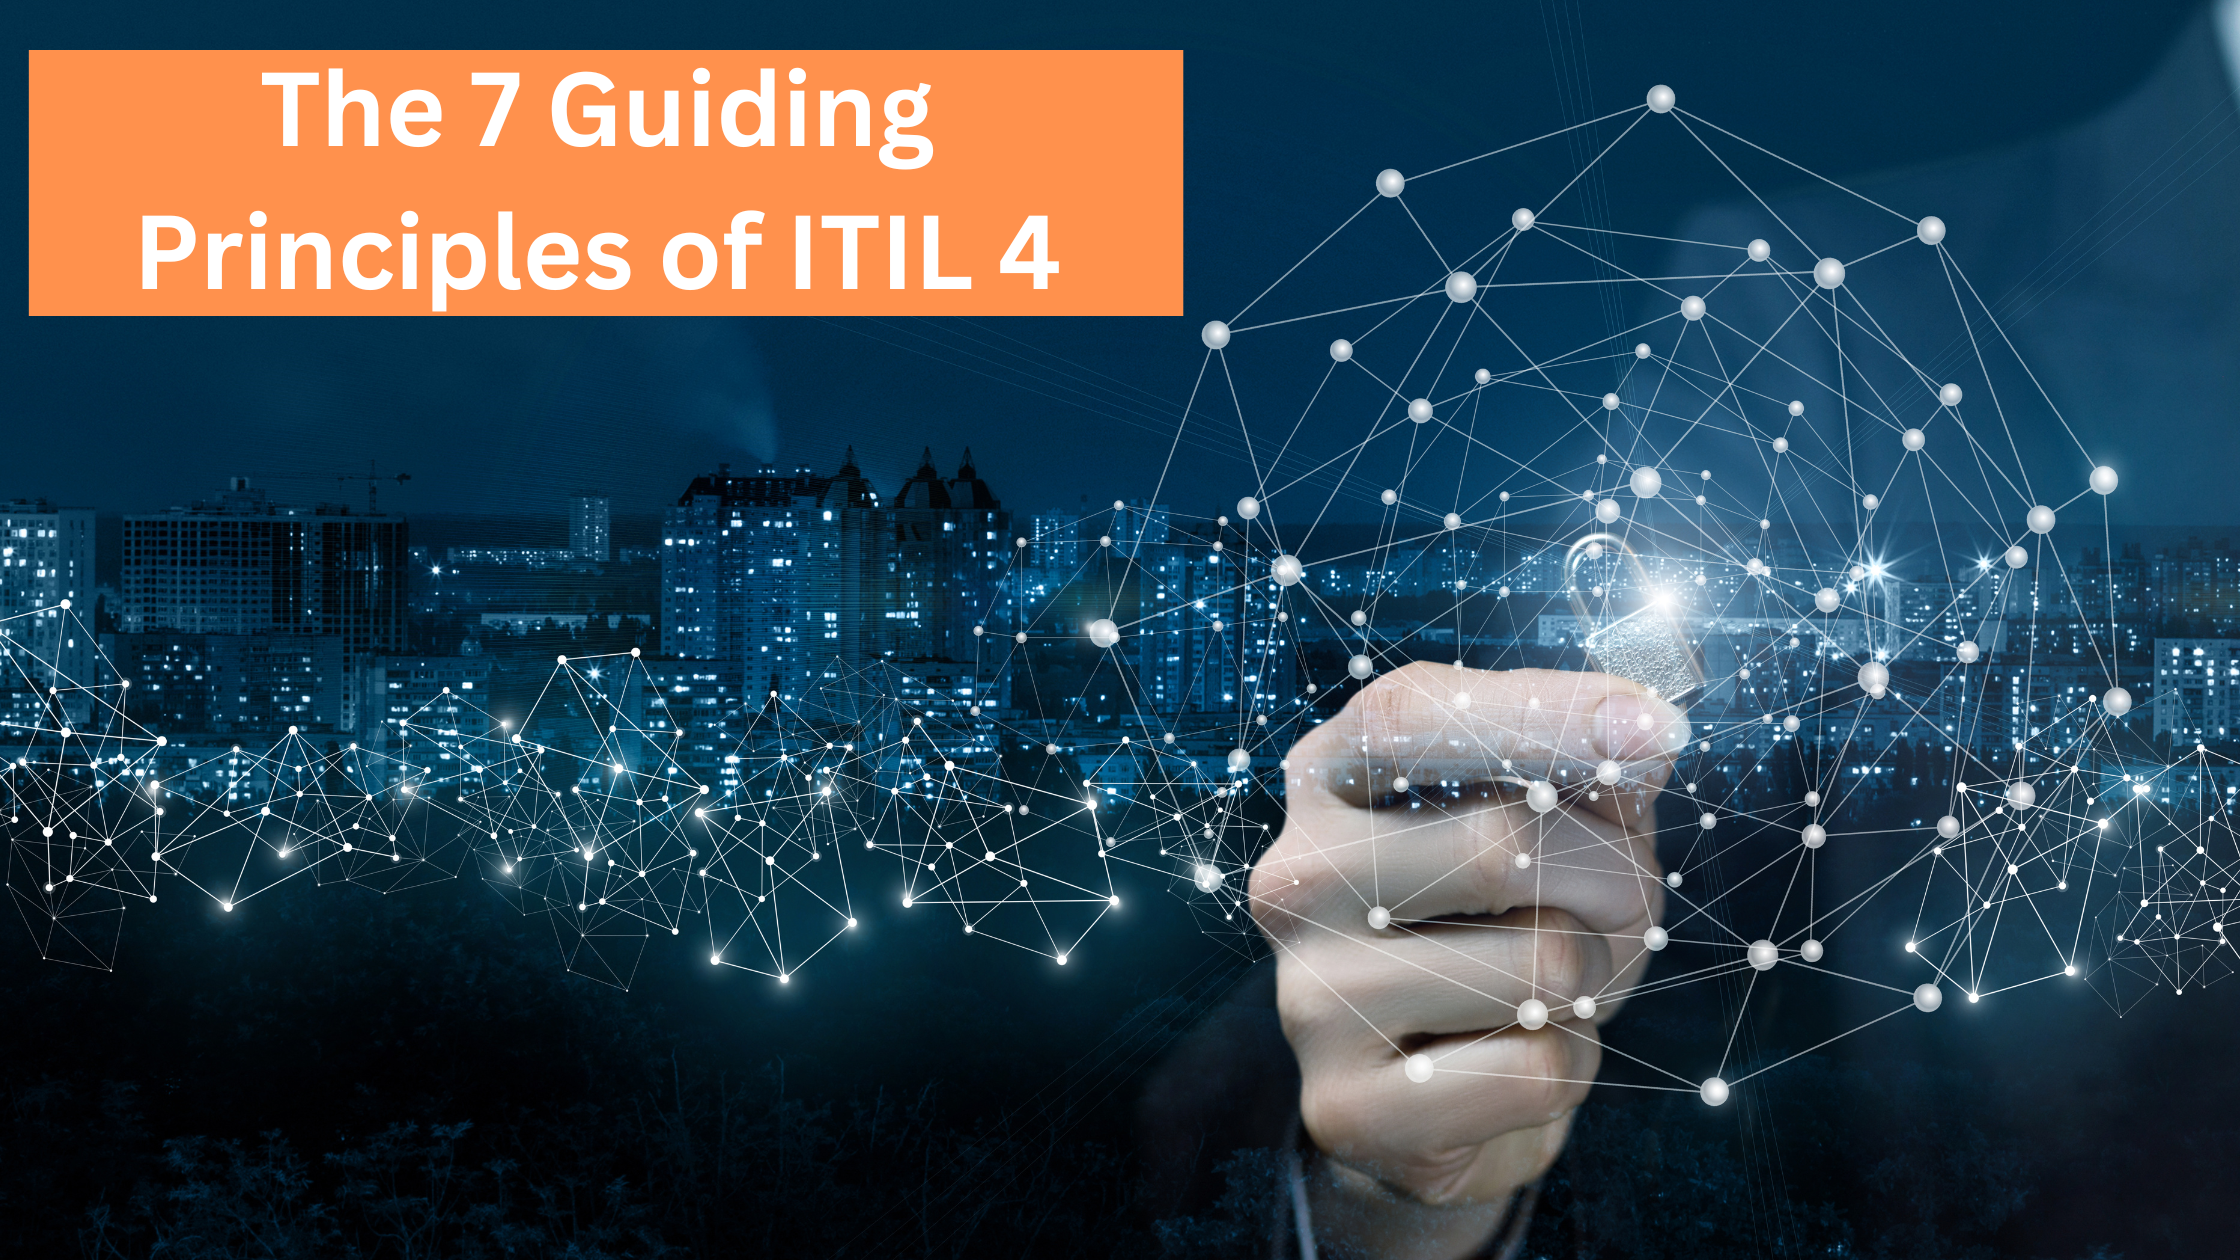 "From Chaos to Order: Implementing the 7 ITIL Guiding Principles in Your Organization"